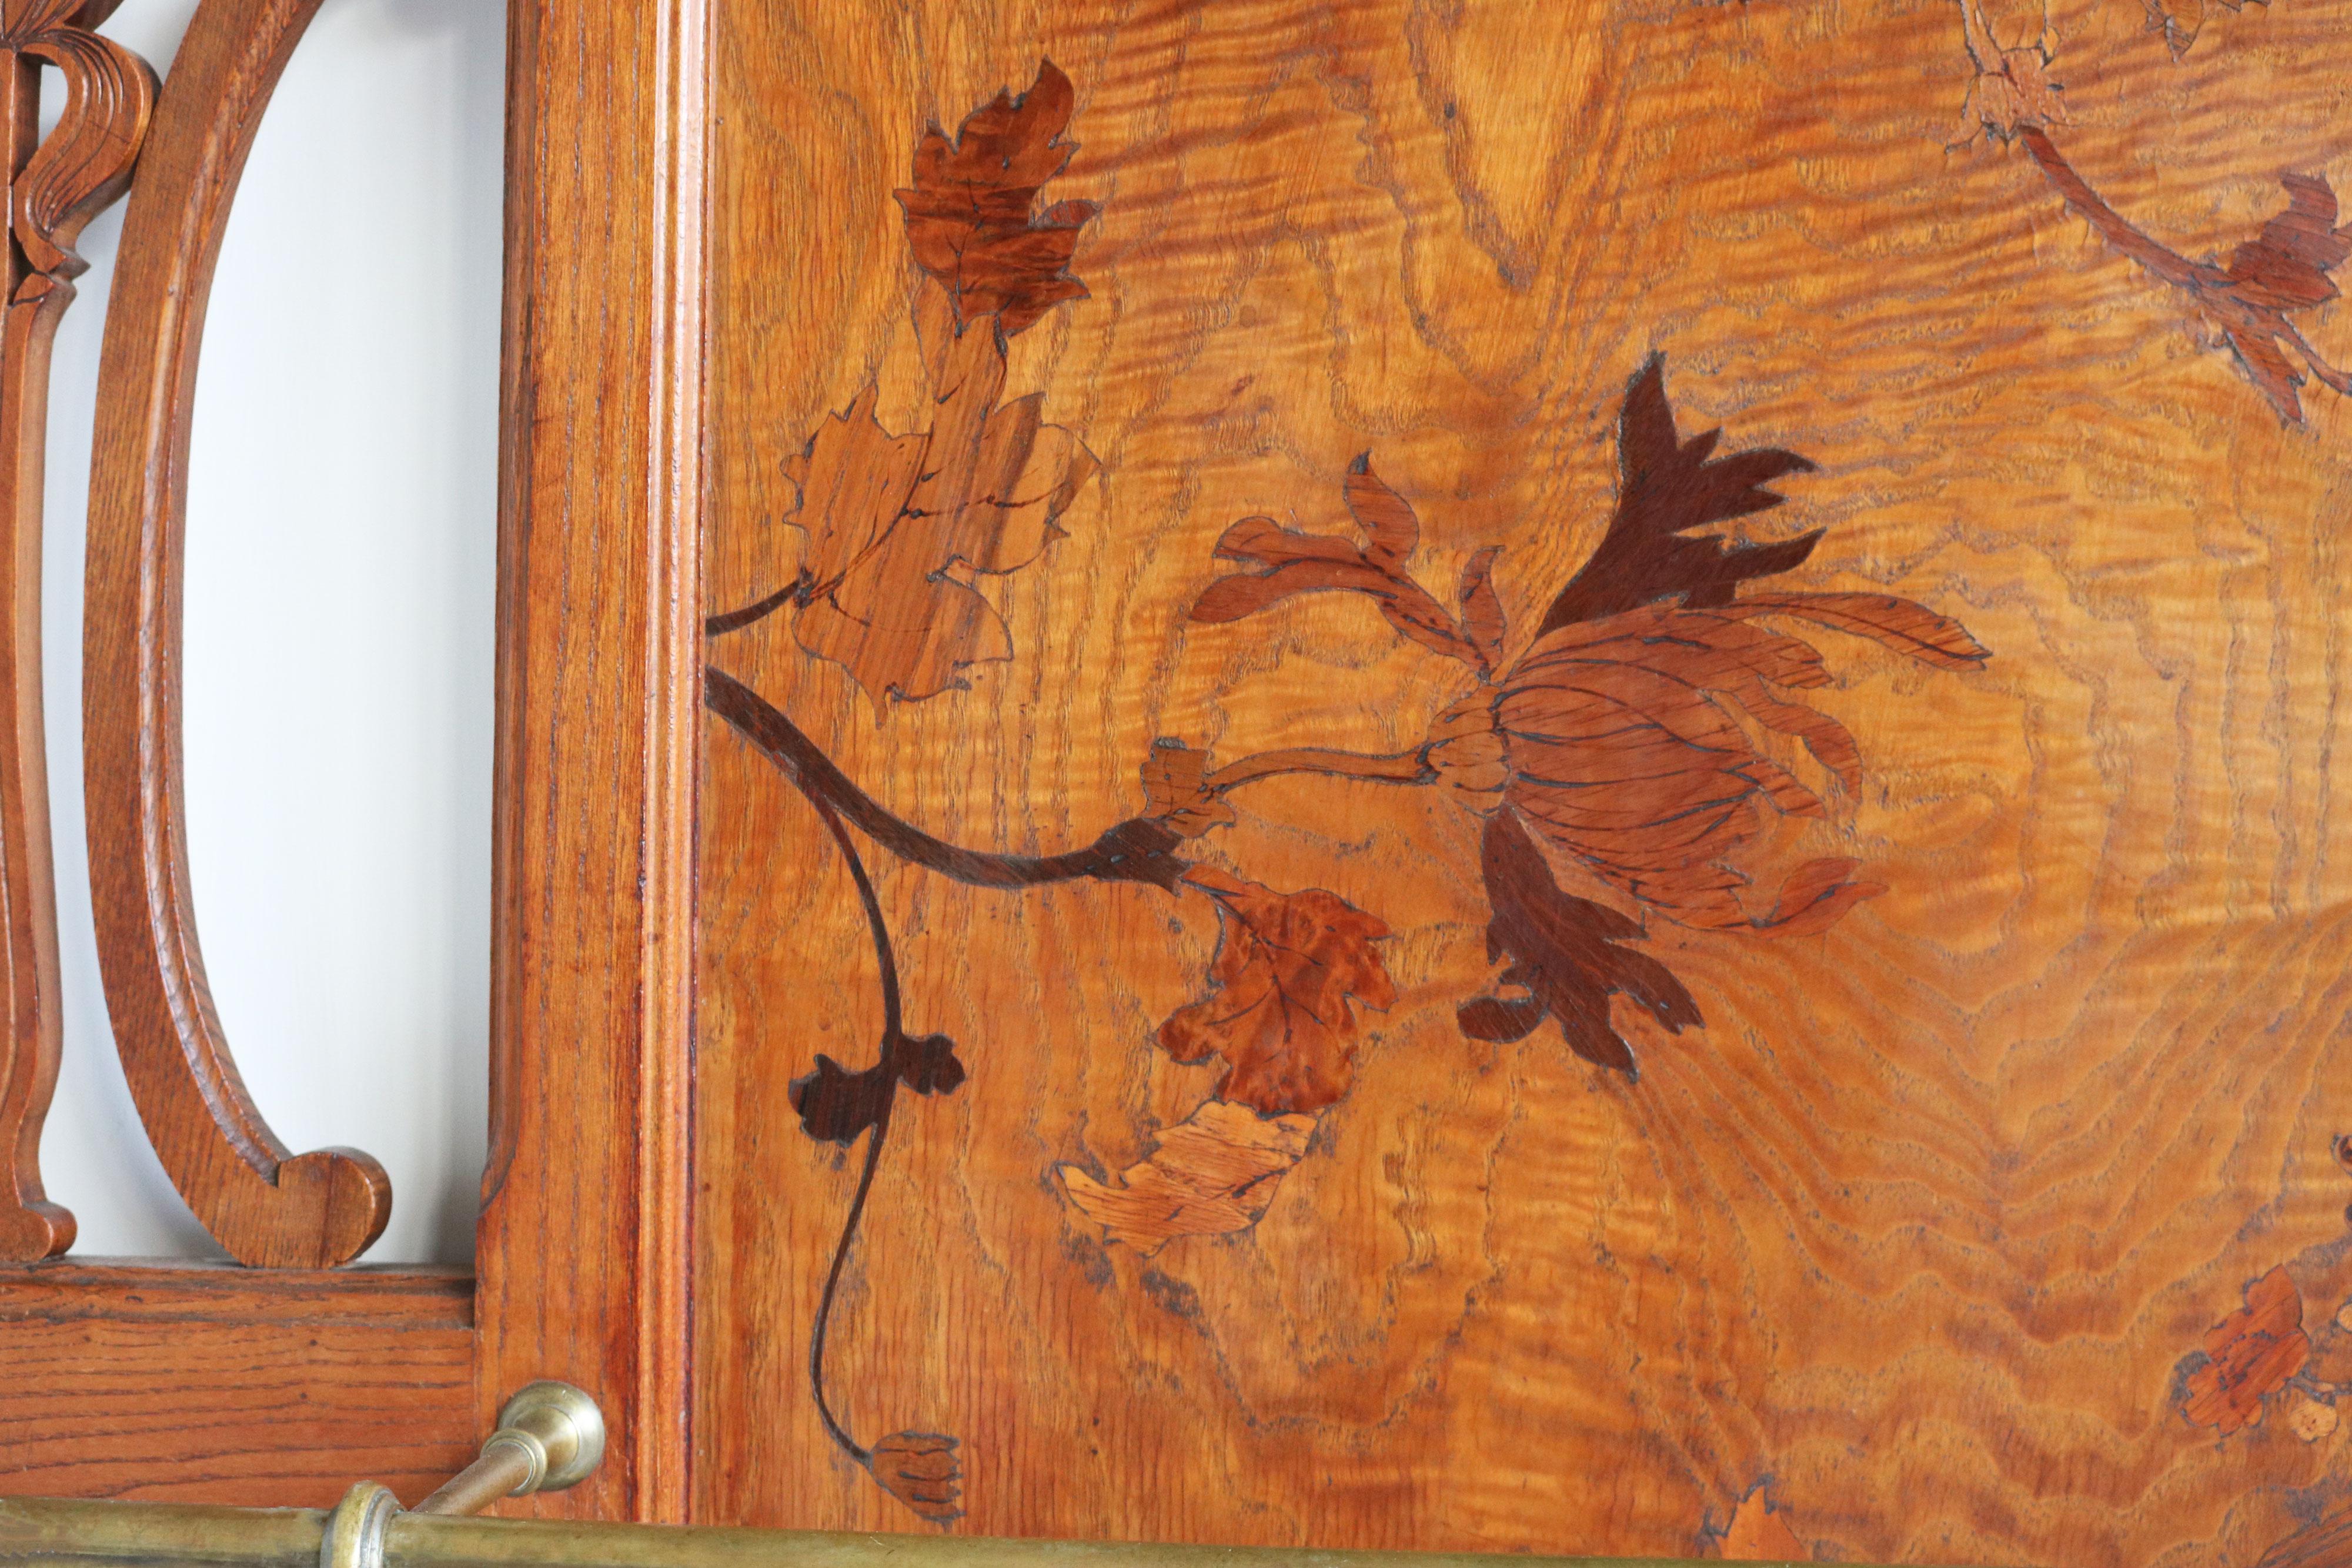 French Art nouveau hall tree / coat rack by Emile galle 1905 marquetry hallway For Sale 5